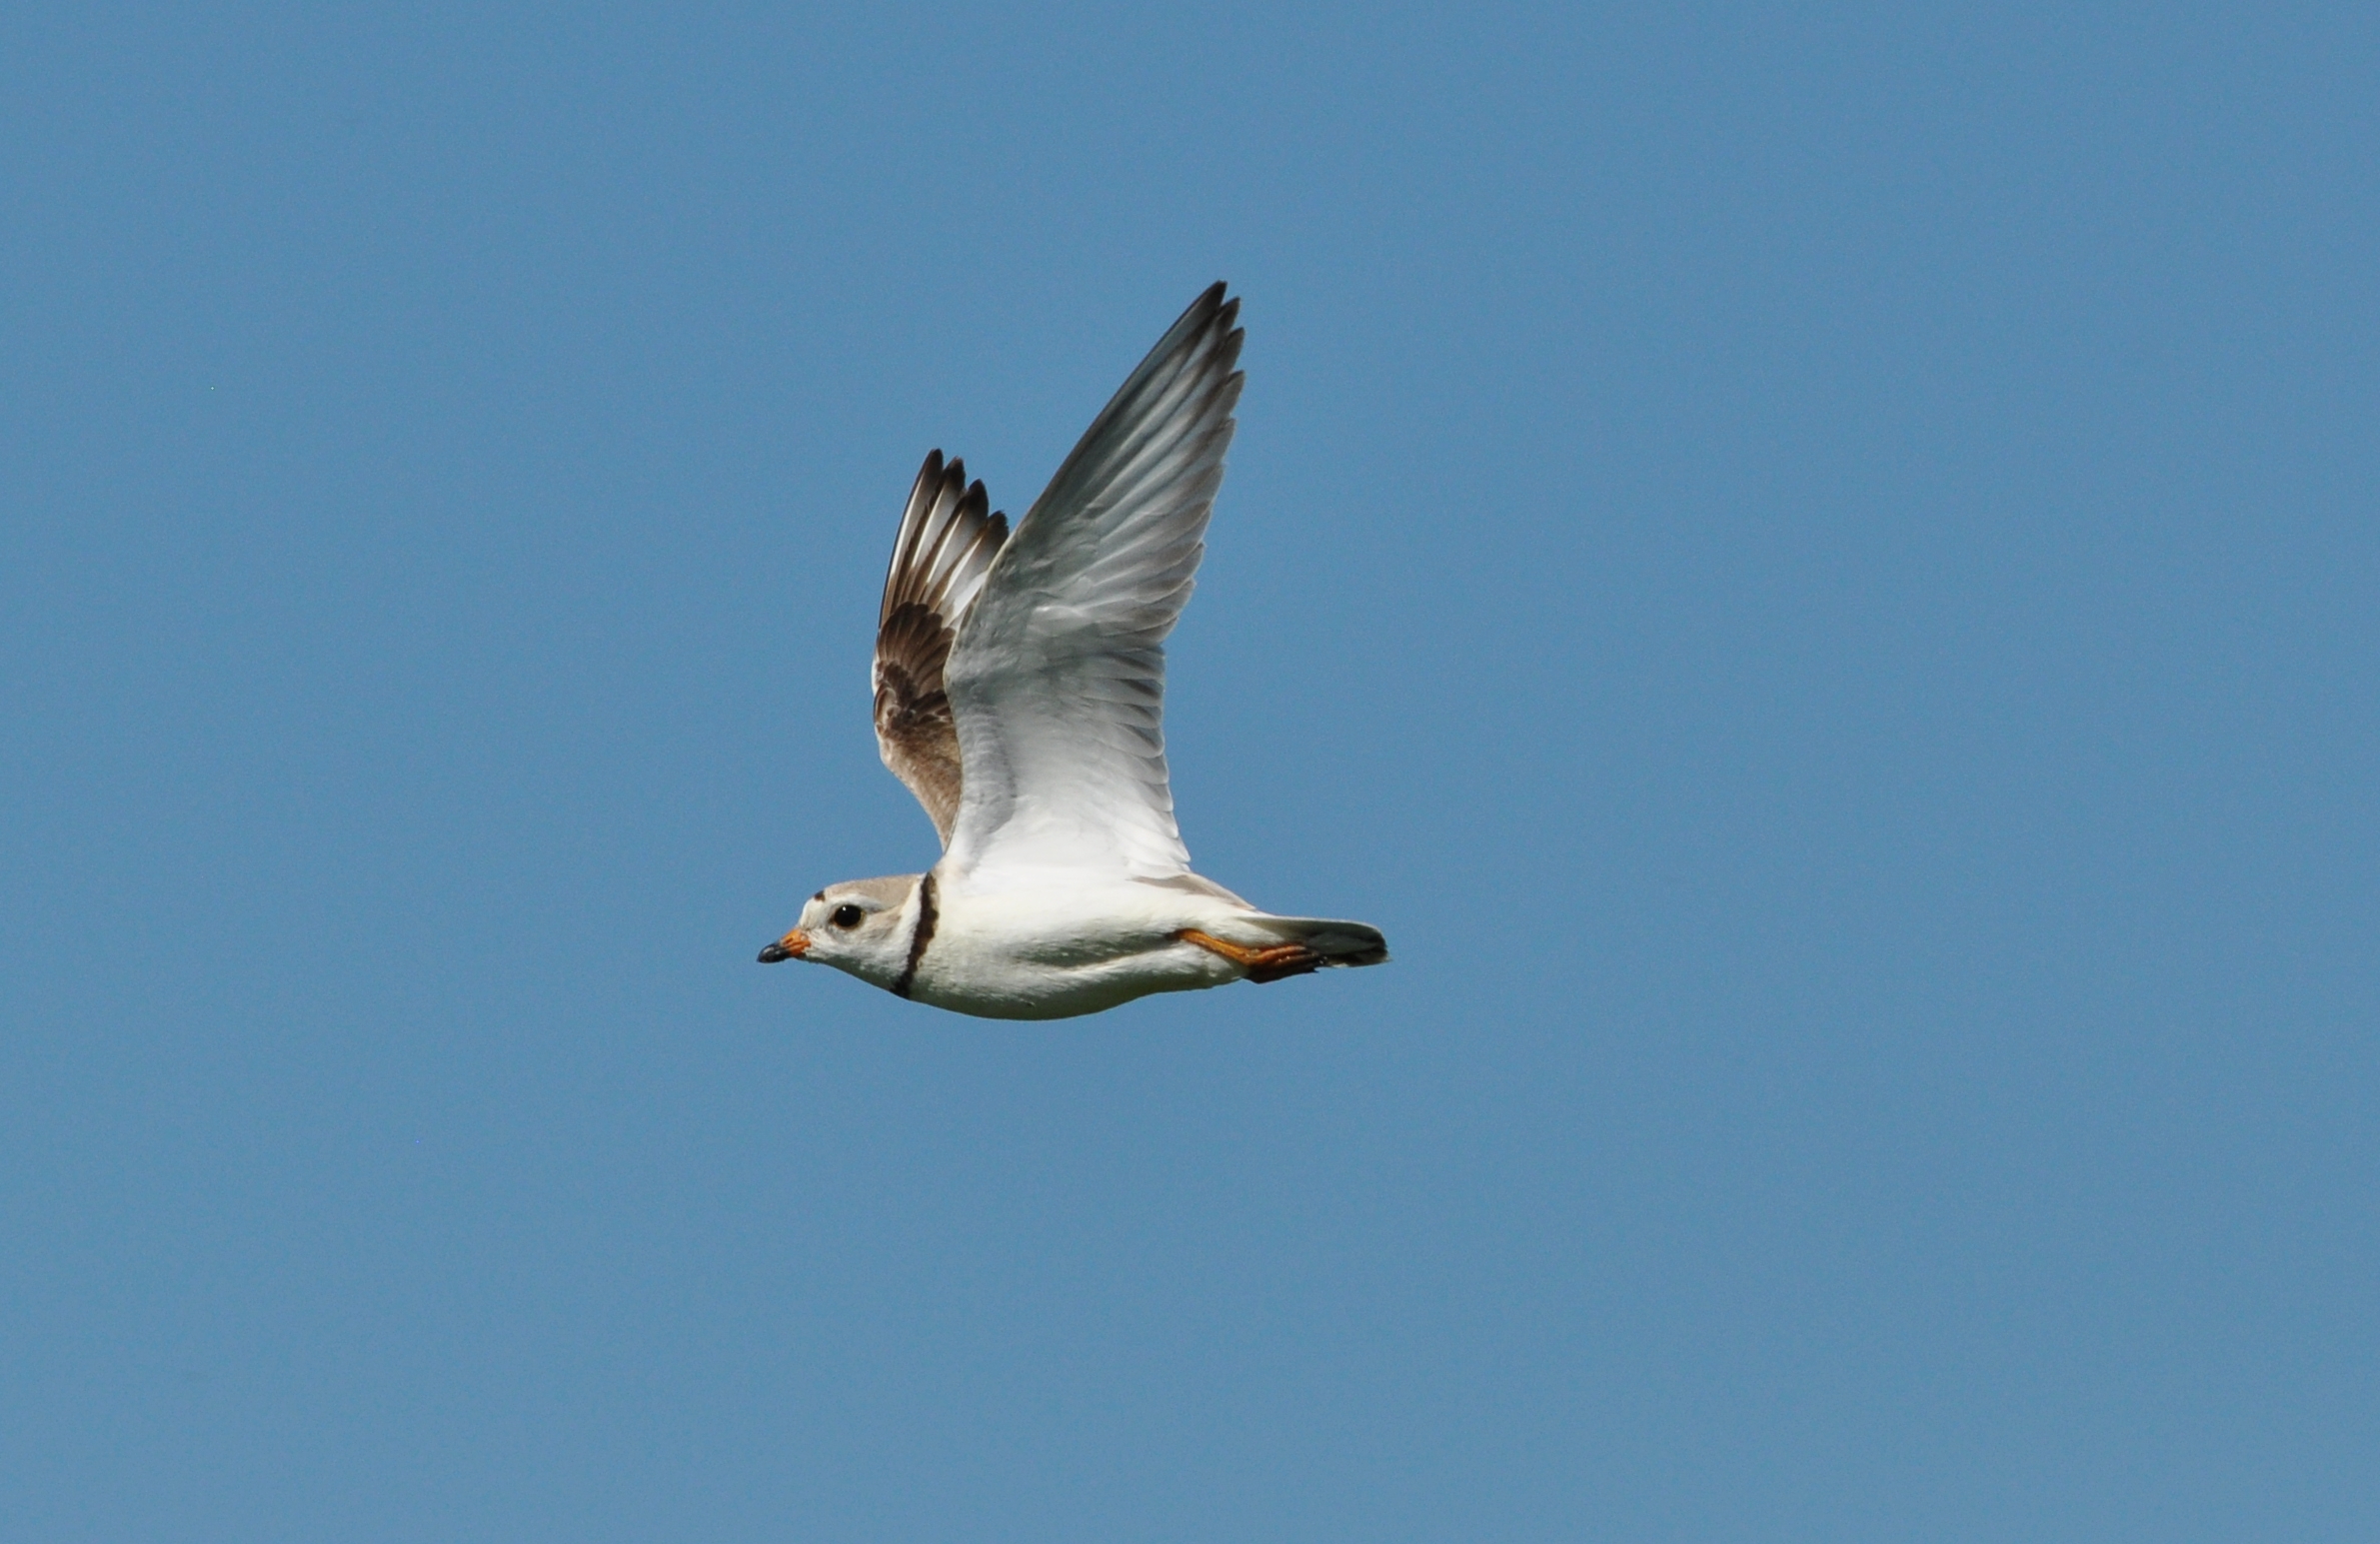 14th Place - Piping Plover on the Fly (7488340326)